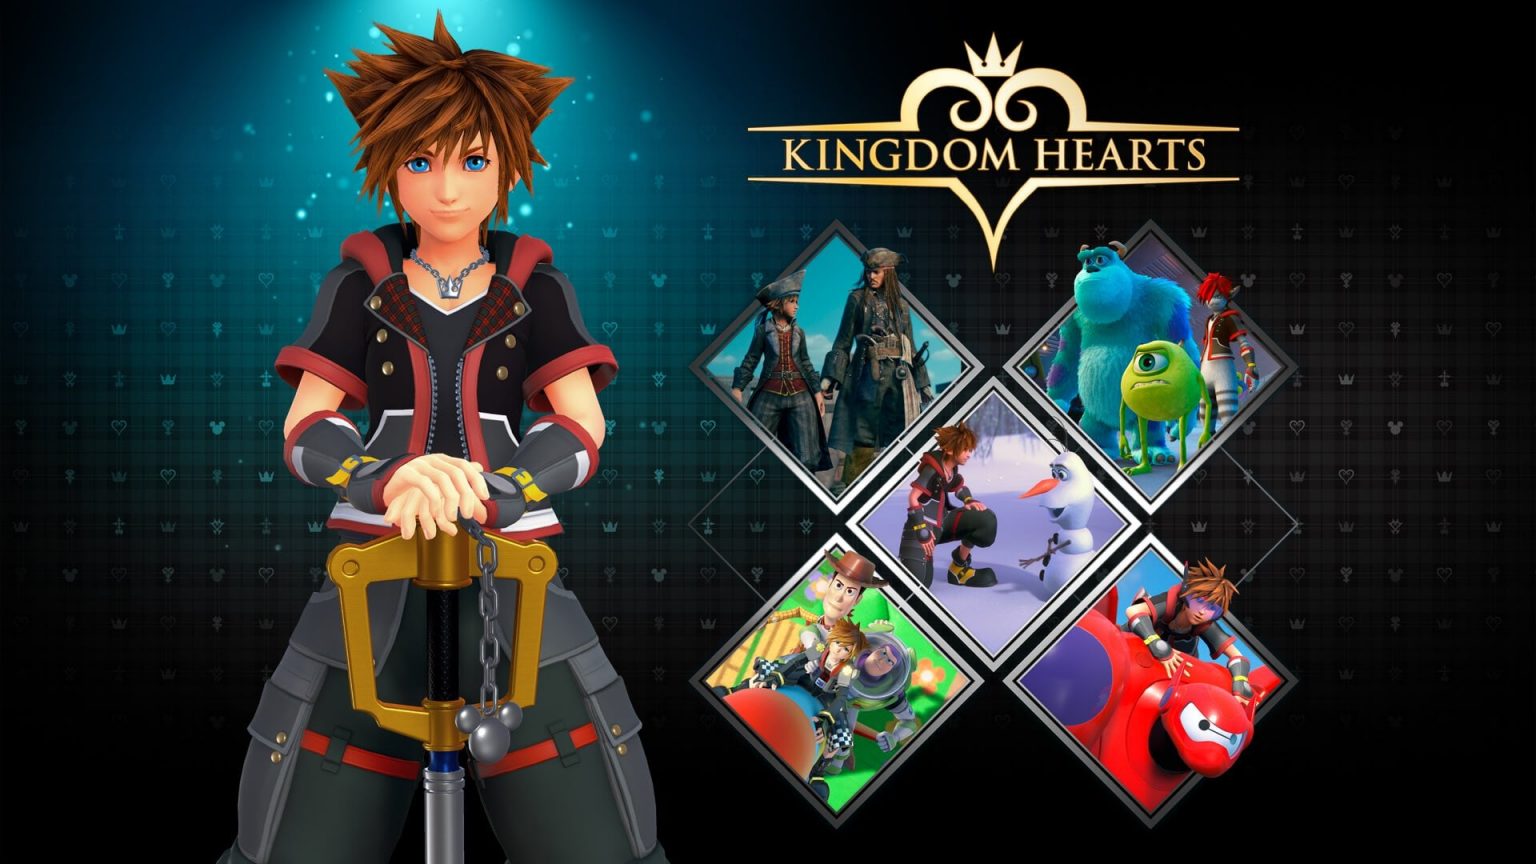 Kingdom Hearts 3 PC Version Full Game Free Download - The Gamer HQ ...